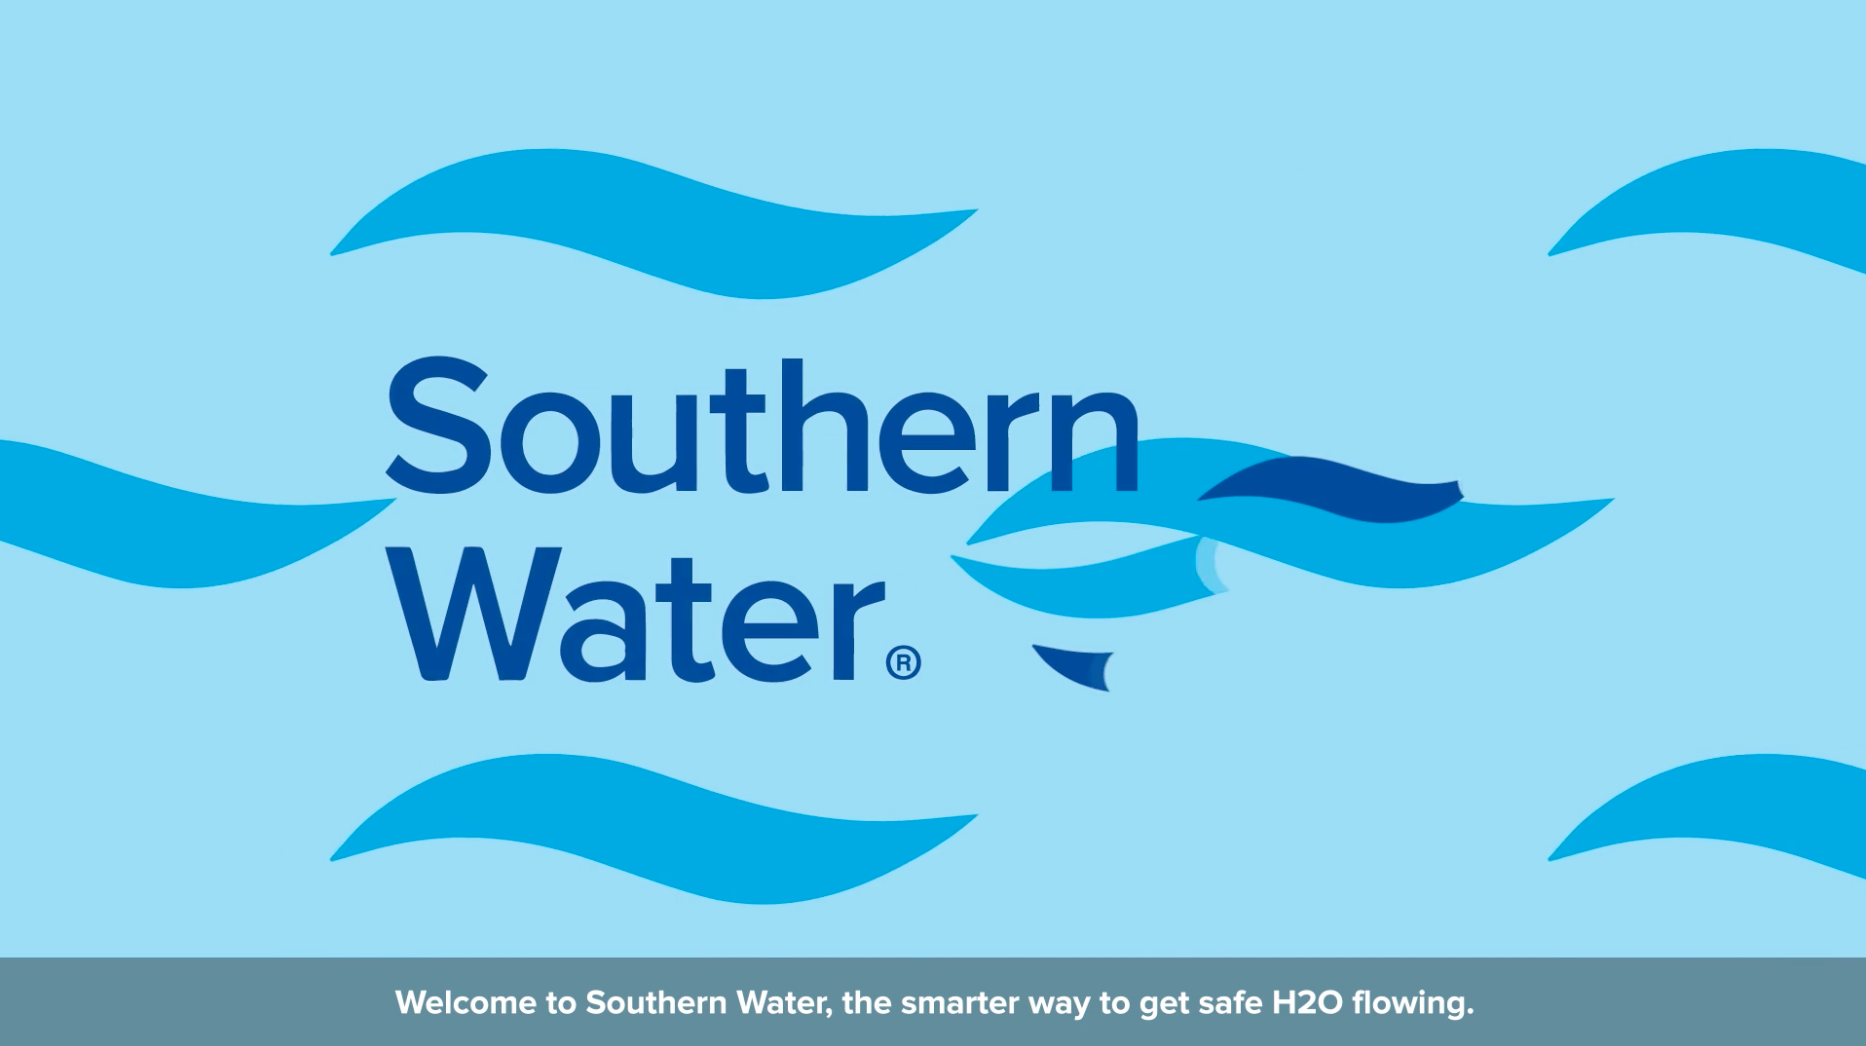 Text on a blue background reads 'Southern Water. Welcome to Southern Water, the smarter way to get safe H20 flowing'.